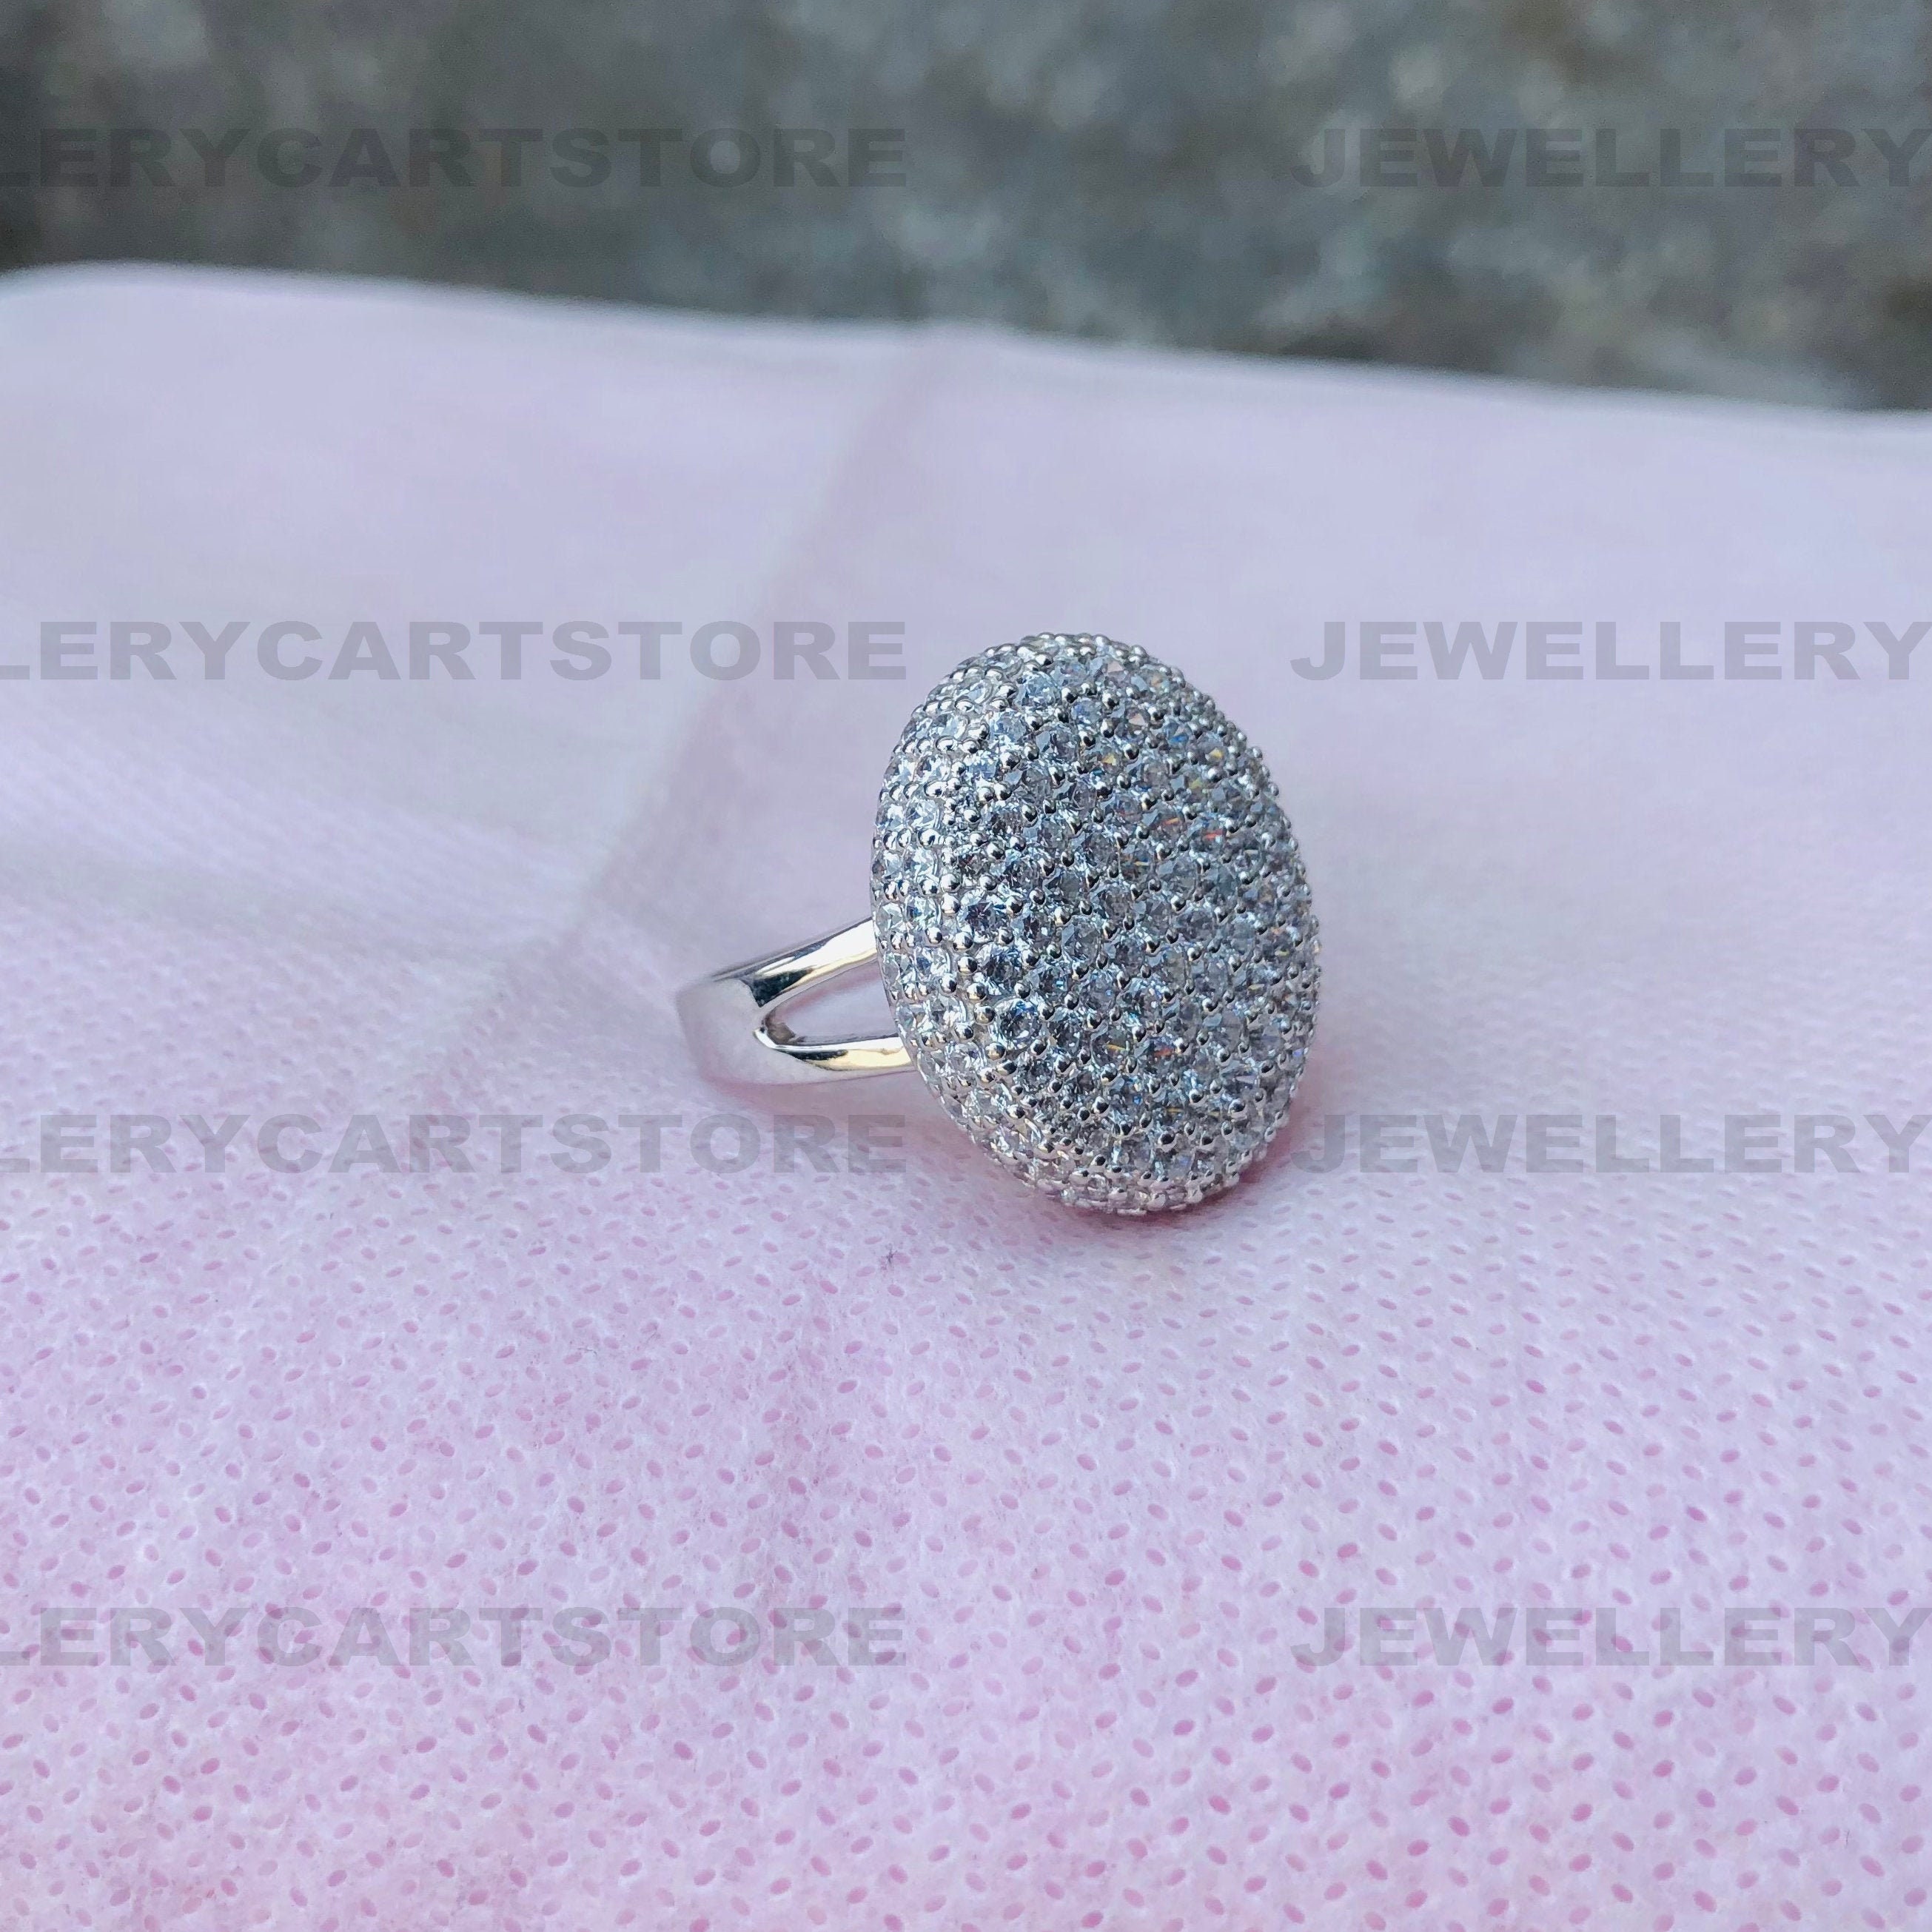 Bella Swan's engagement ring from the 